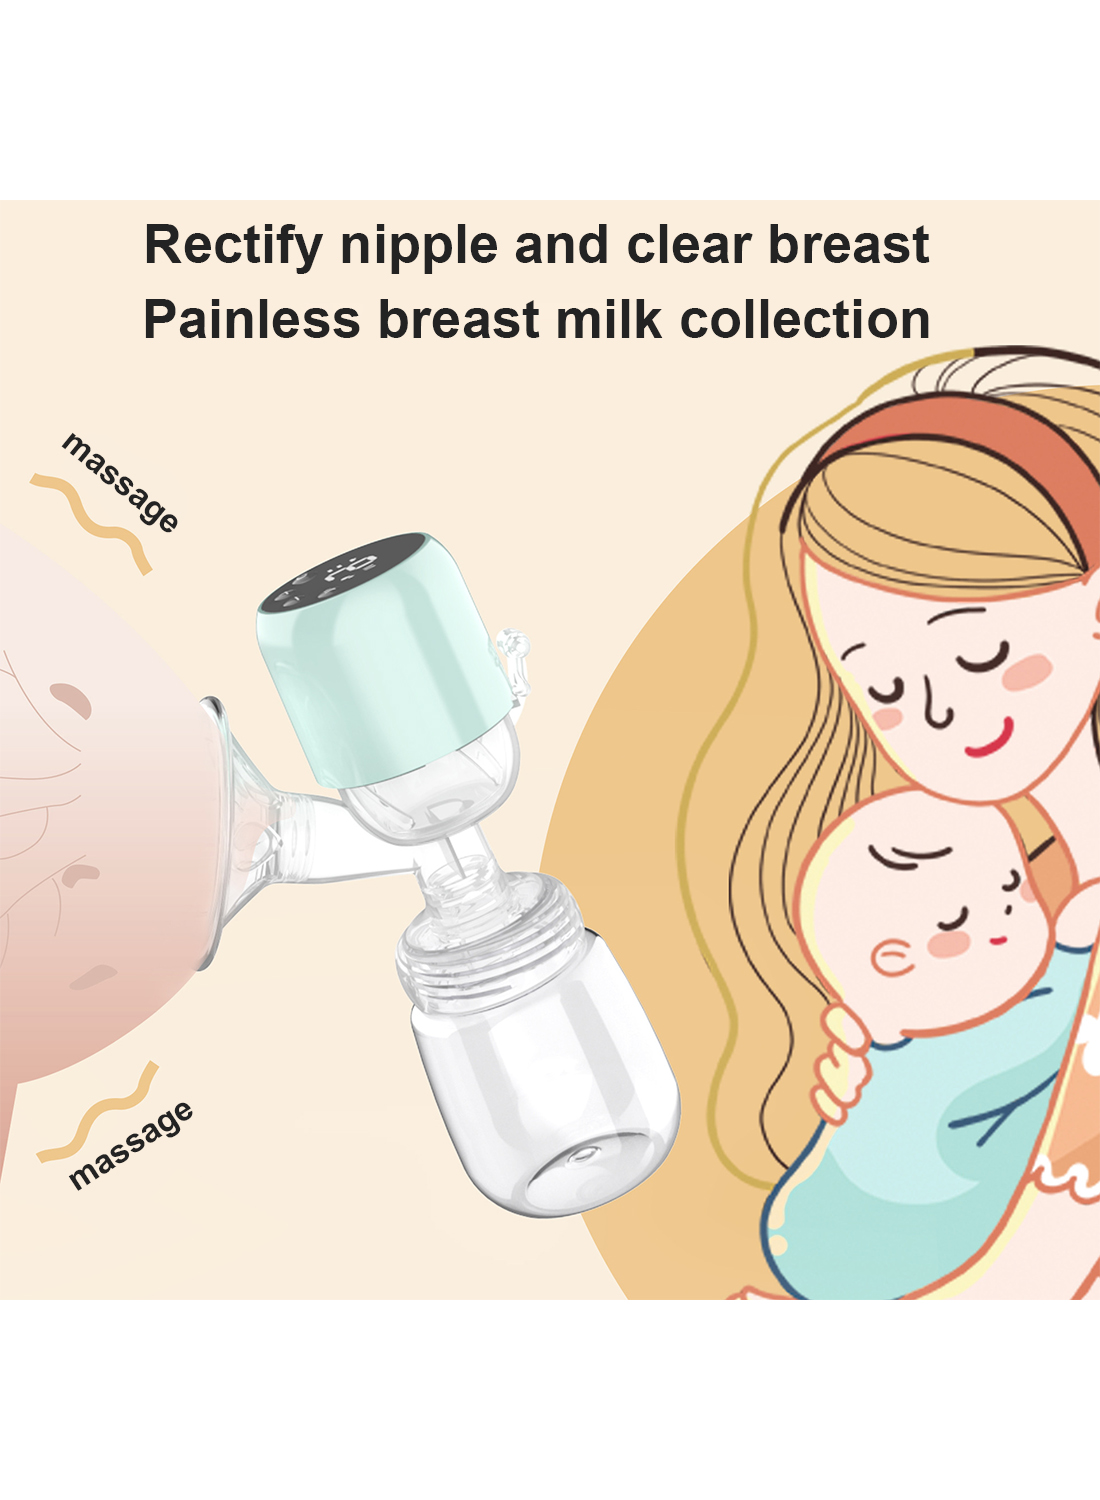 Two in One Manual Electric Breast Pump